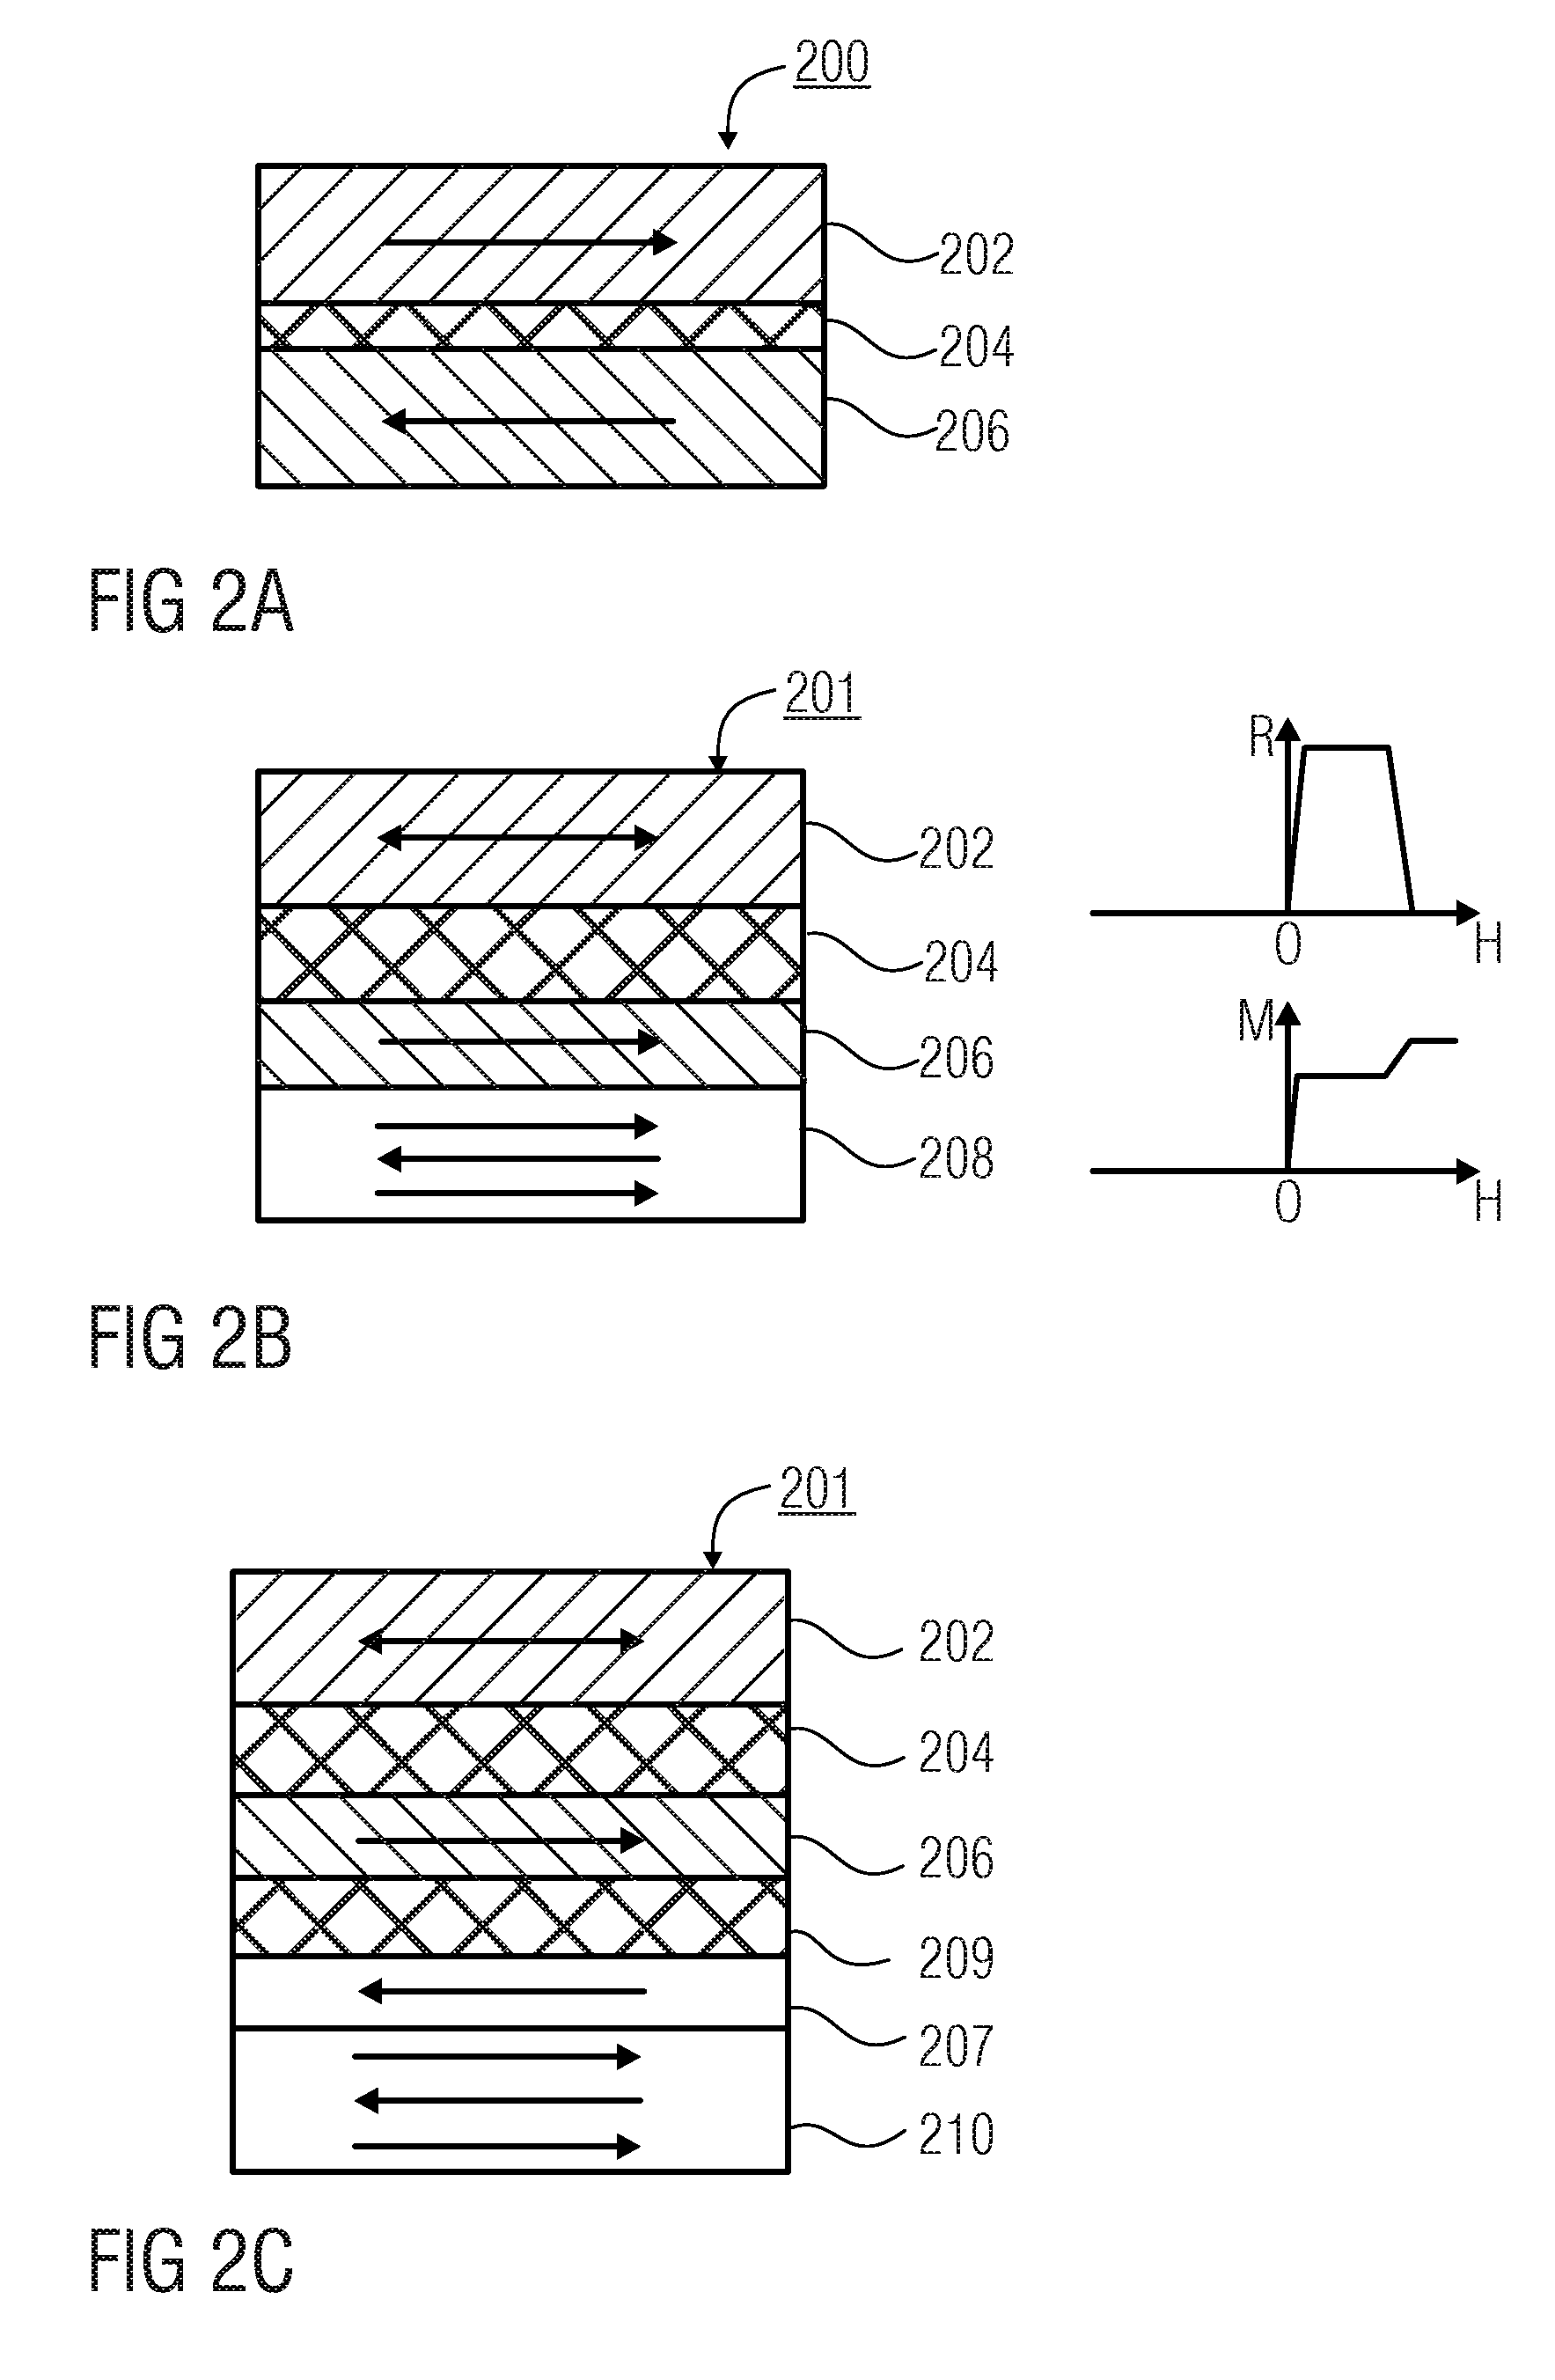 Concept for Detecting a Change of a Physical Quantity by Means of a Conductor Structure